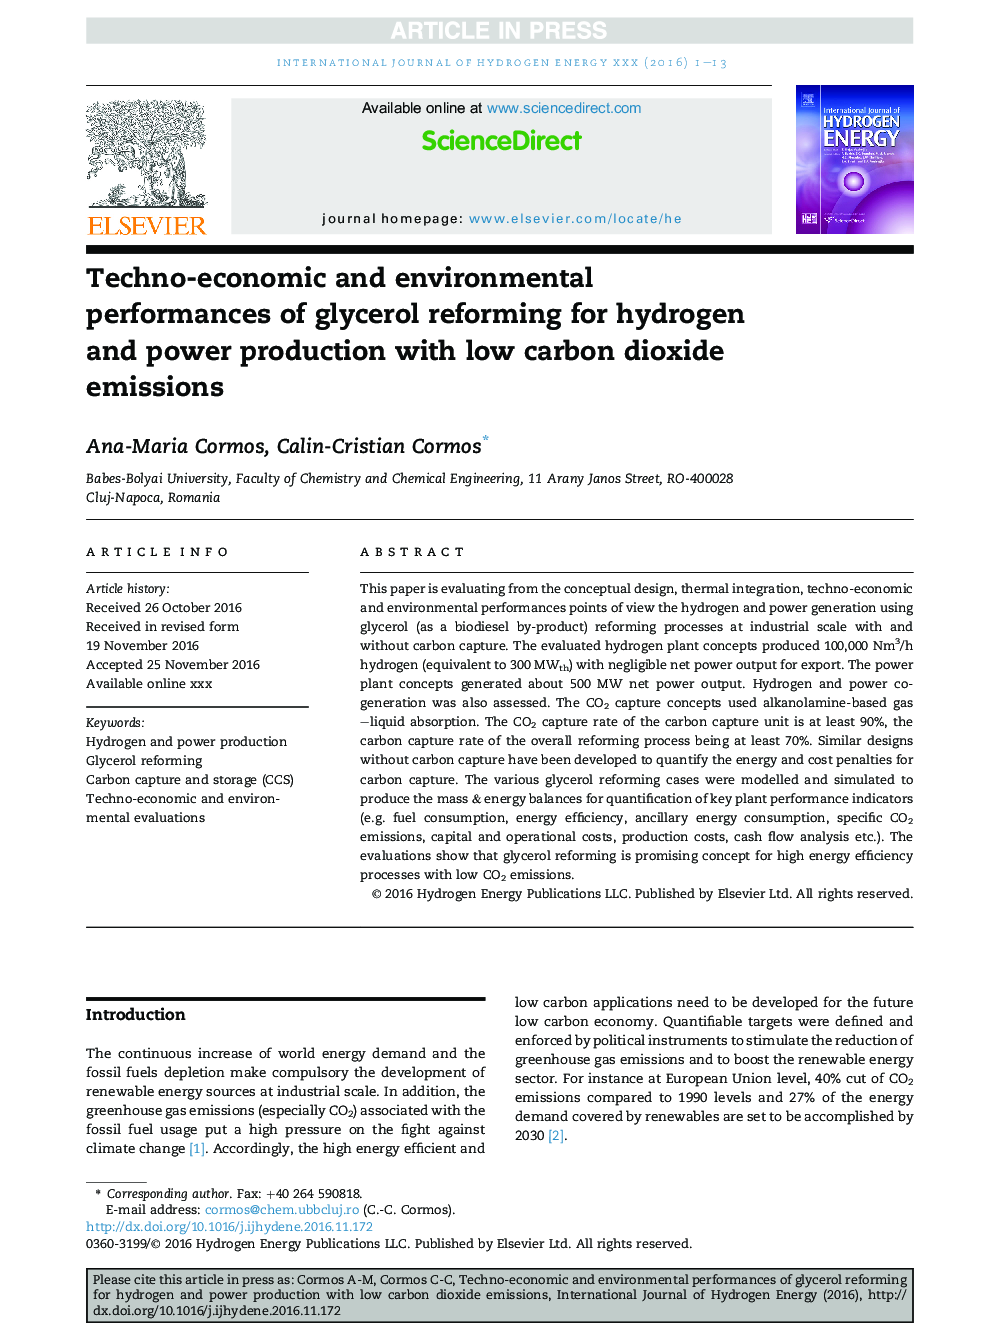 Techno-economic and environmental performances of glycerol reforming for hydrogen and power production with low carbon dioxide emissions